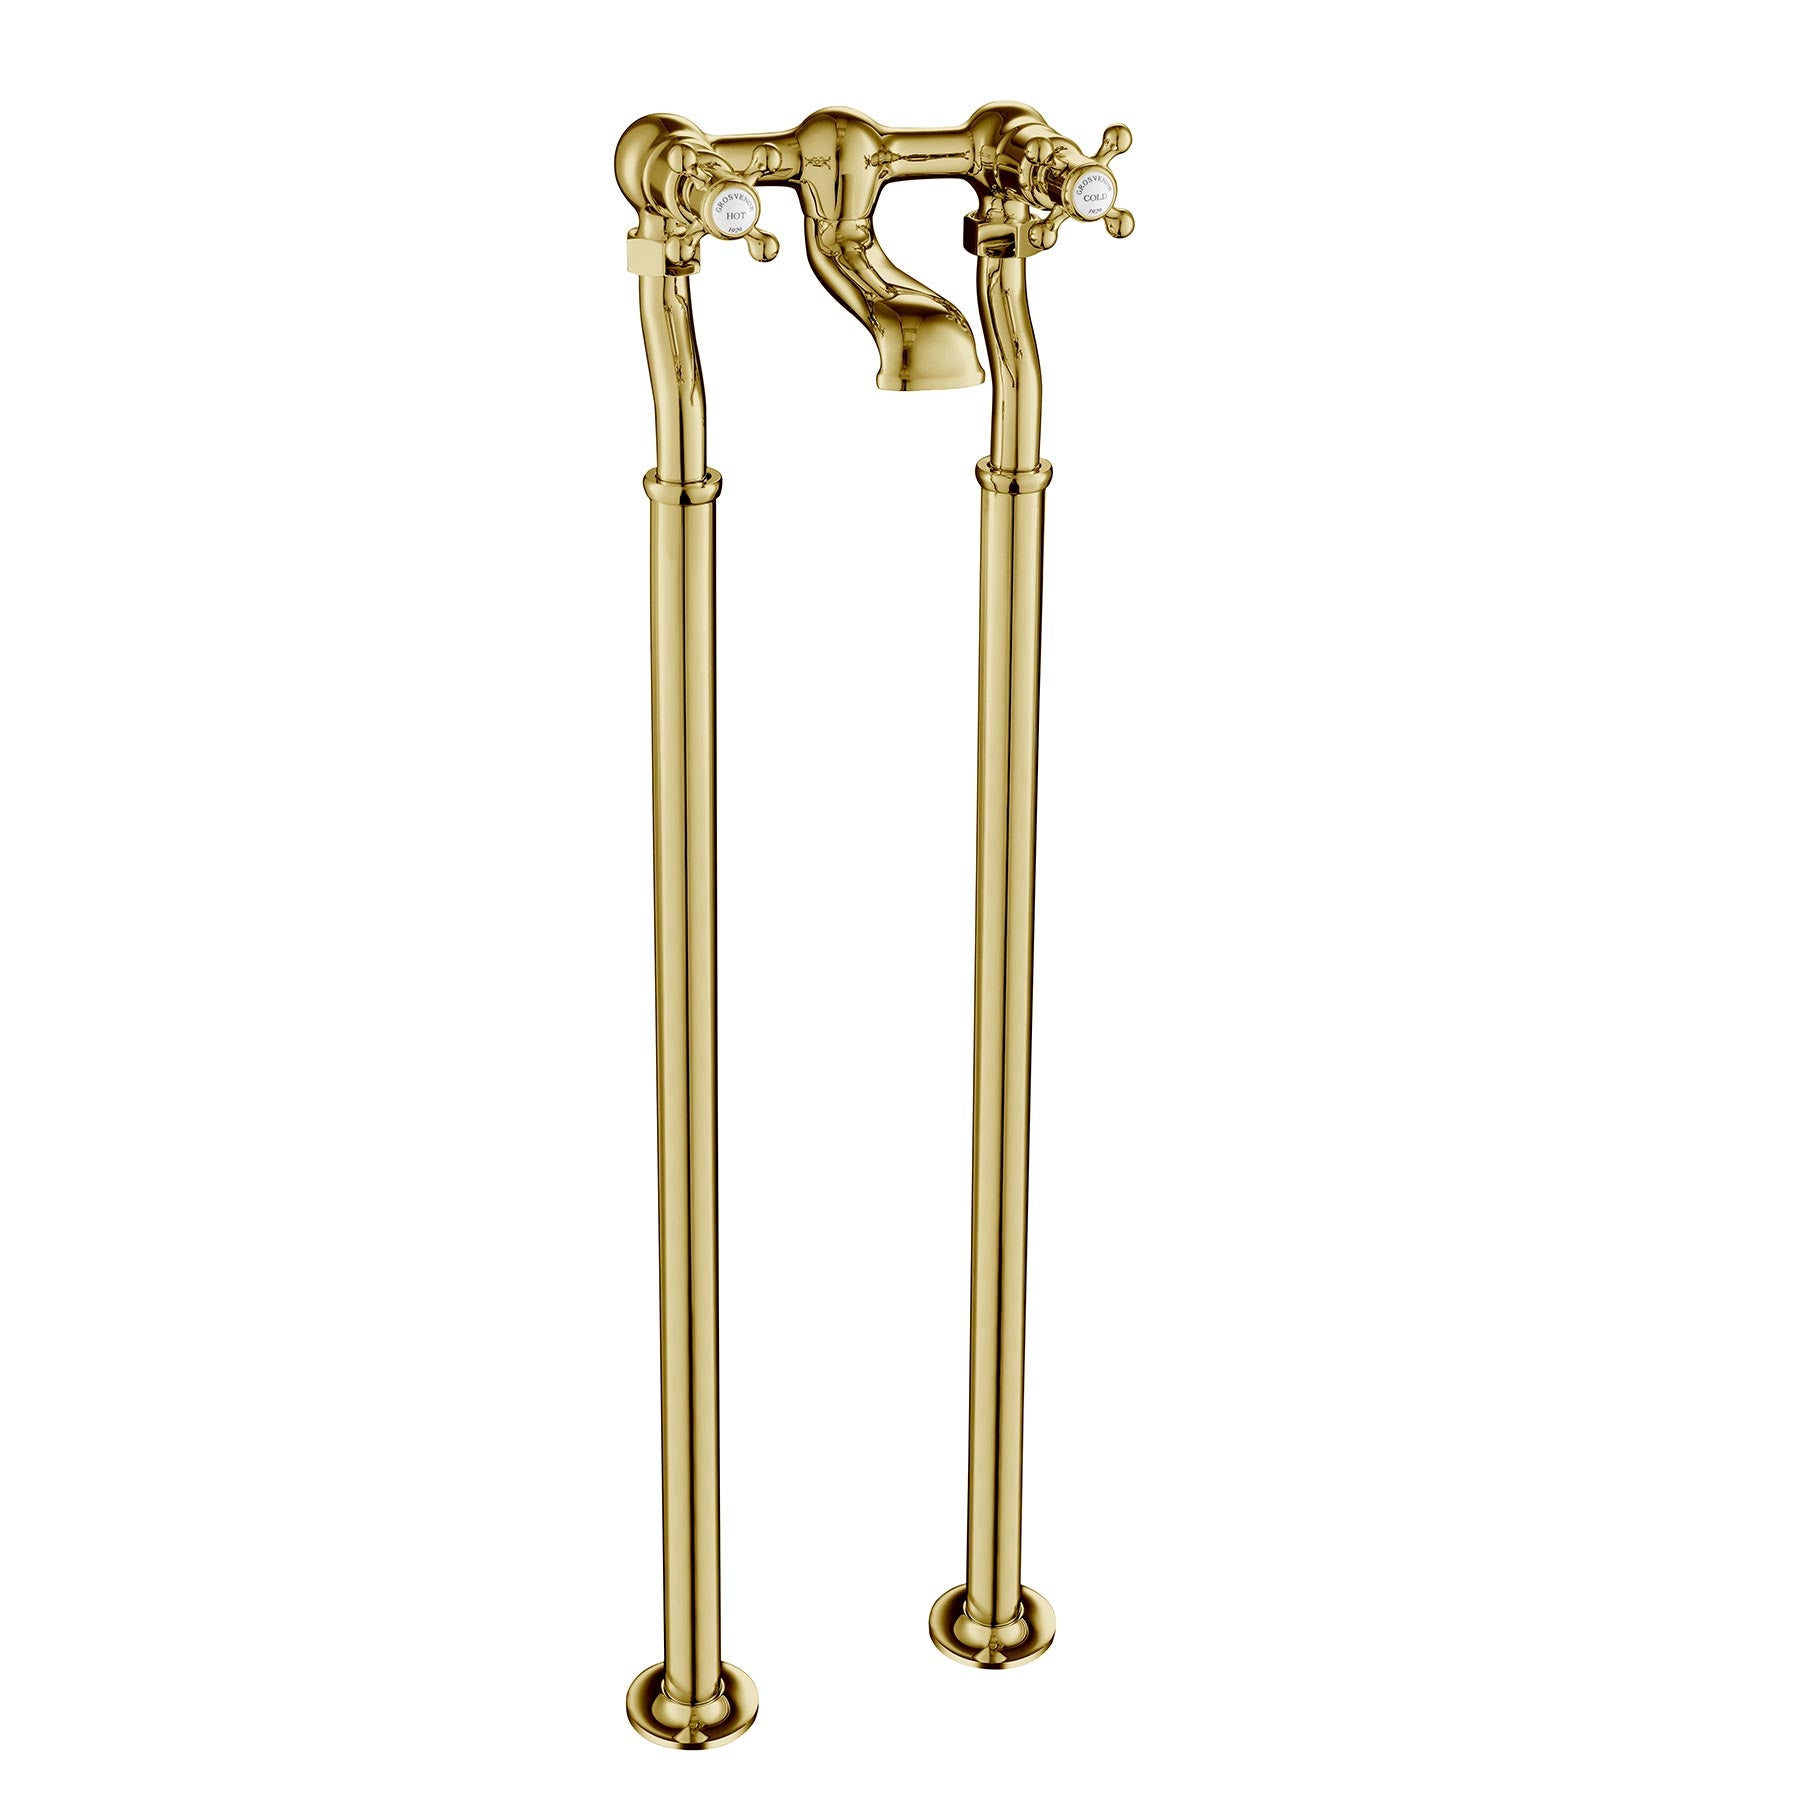 Chester Gold Cross Free Standing bath filler.The Bath Filler is 958mm high and projects 162mm, Manufactured from solid brass and ceramic disc technology, it prevents drips and prolongs the life of your bath filler. 